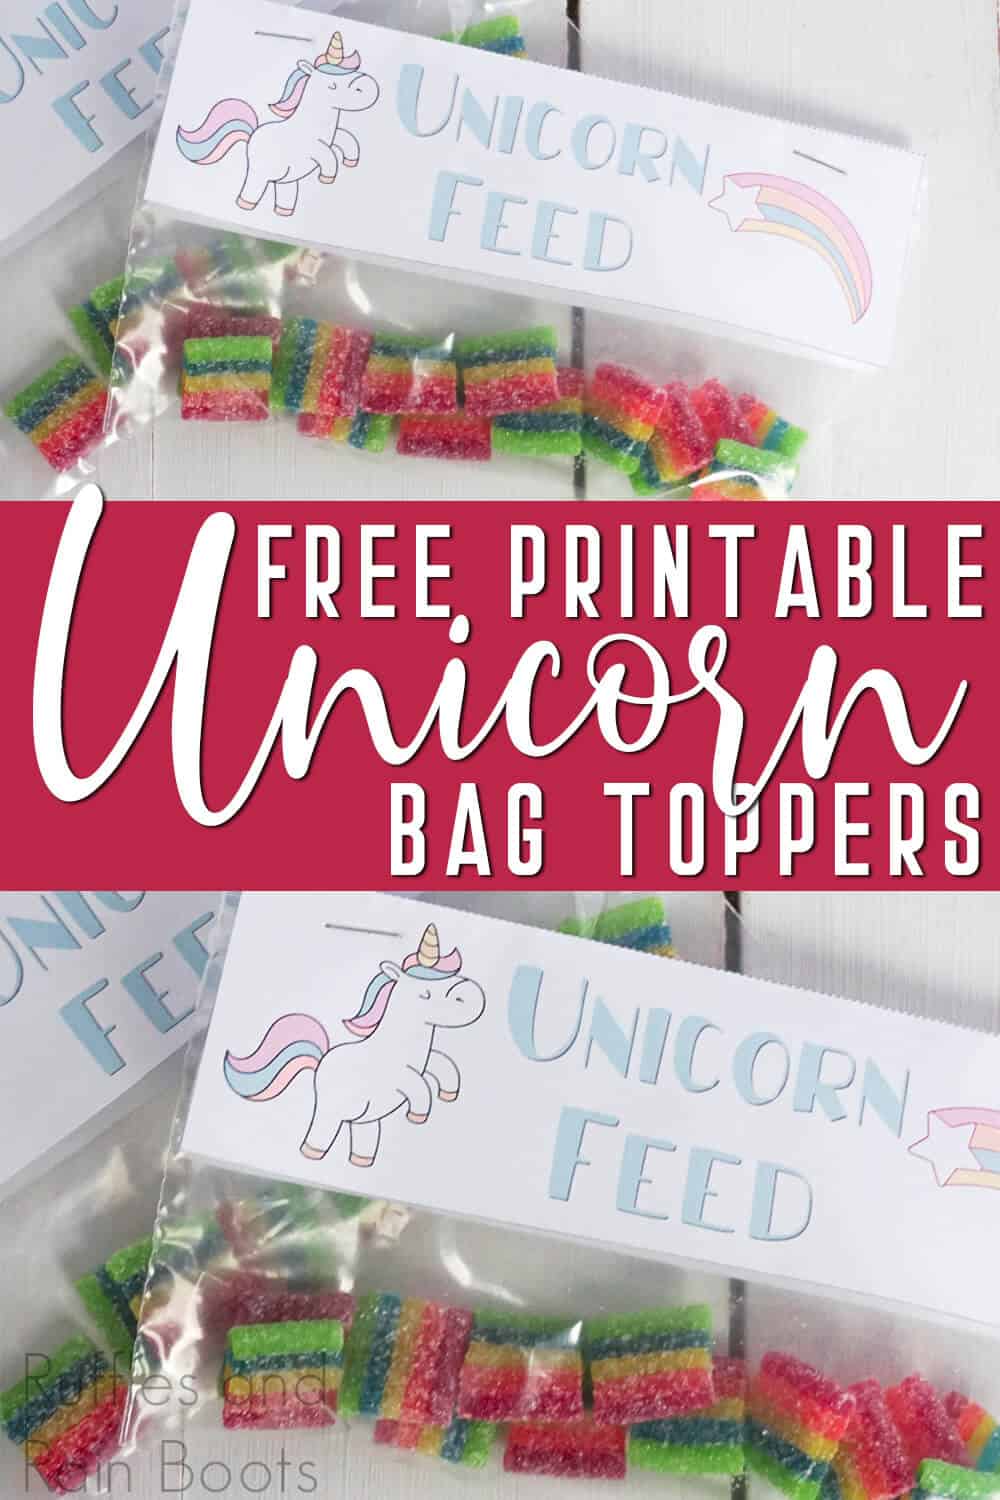 photo collage of rainbow candy in a zipper bag with a unicorn food bag top with text which reads free printable unicorn bag toppers for kids lunches